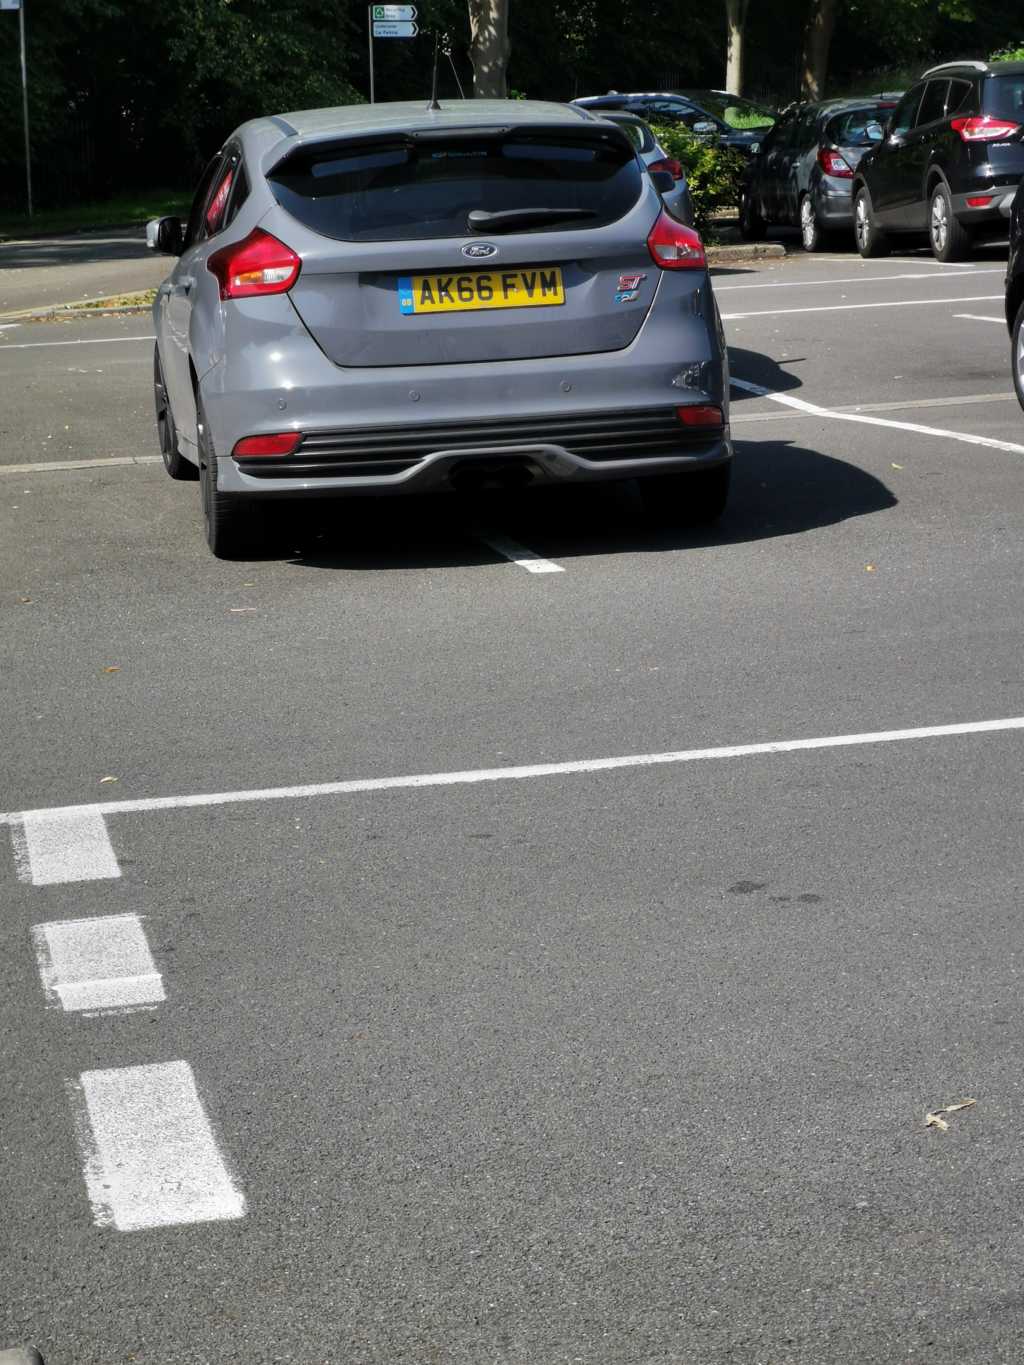 AK66 FVM is an Inconsiderate Parker